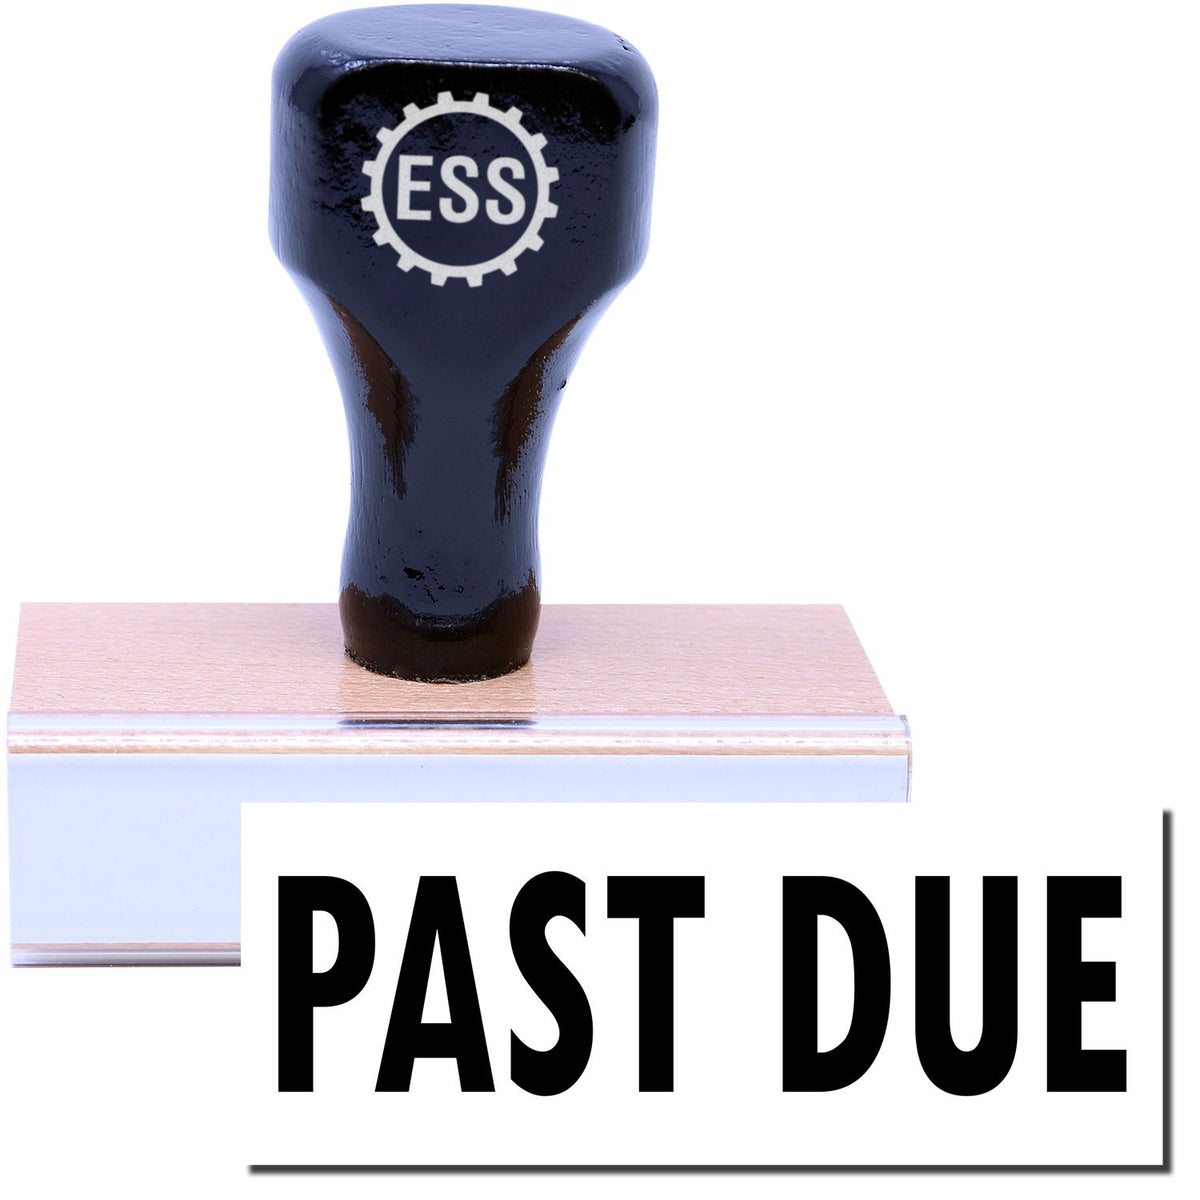 A stock office rubber stamp with a stamped image showing how the text &quot;PAST DUE&quot; in a large font is displayed after stamping.